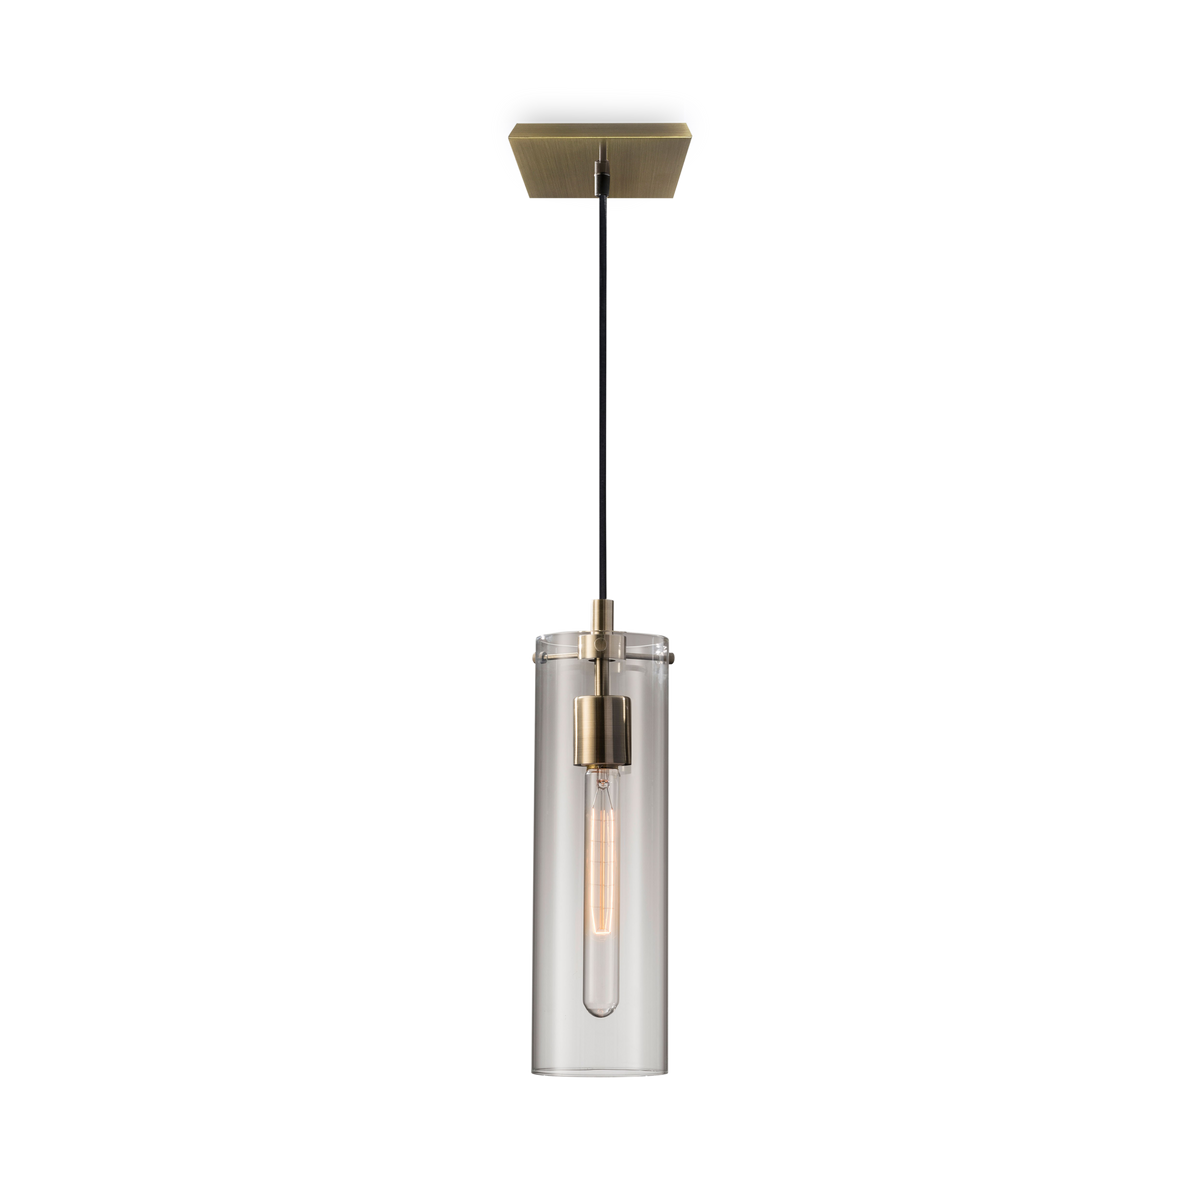 The Glass Cylinder Pendant is a modern-industrial styled lamp tailored to homes seeking functional mood lighting and bold design.